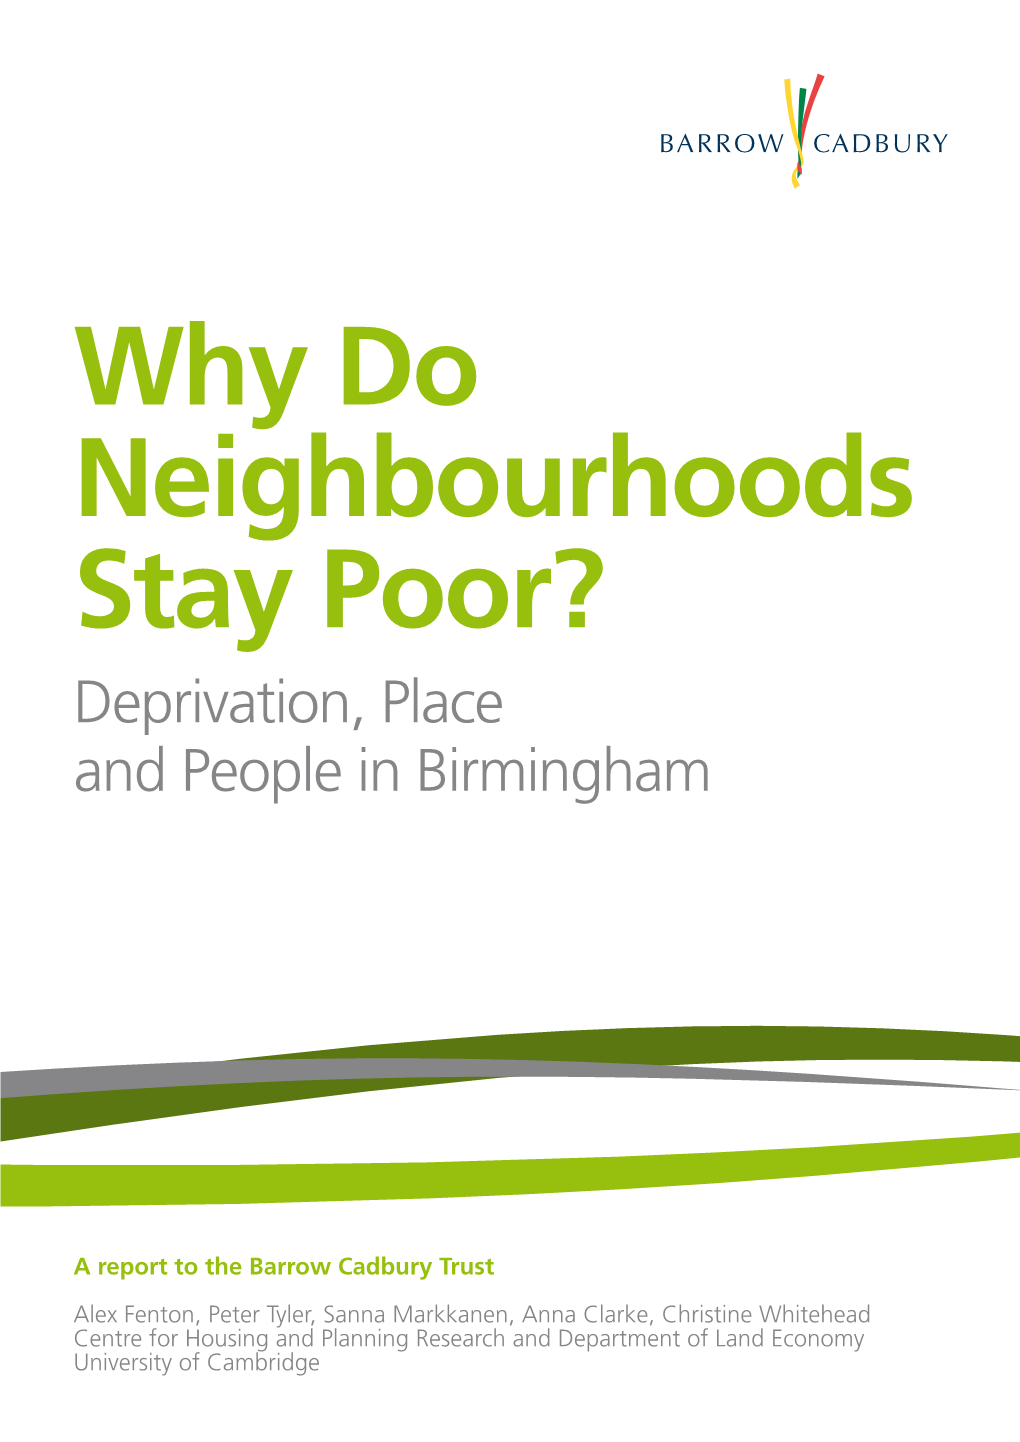 Why Do Neighbourhoods Stay Poor? Deprivation, Place and People in Birmingham